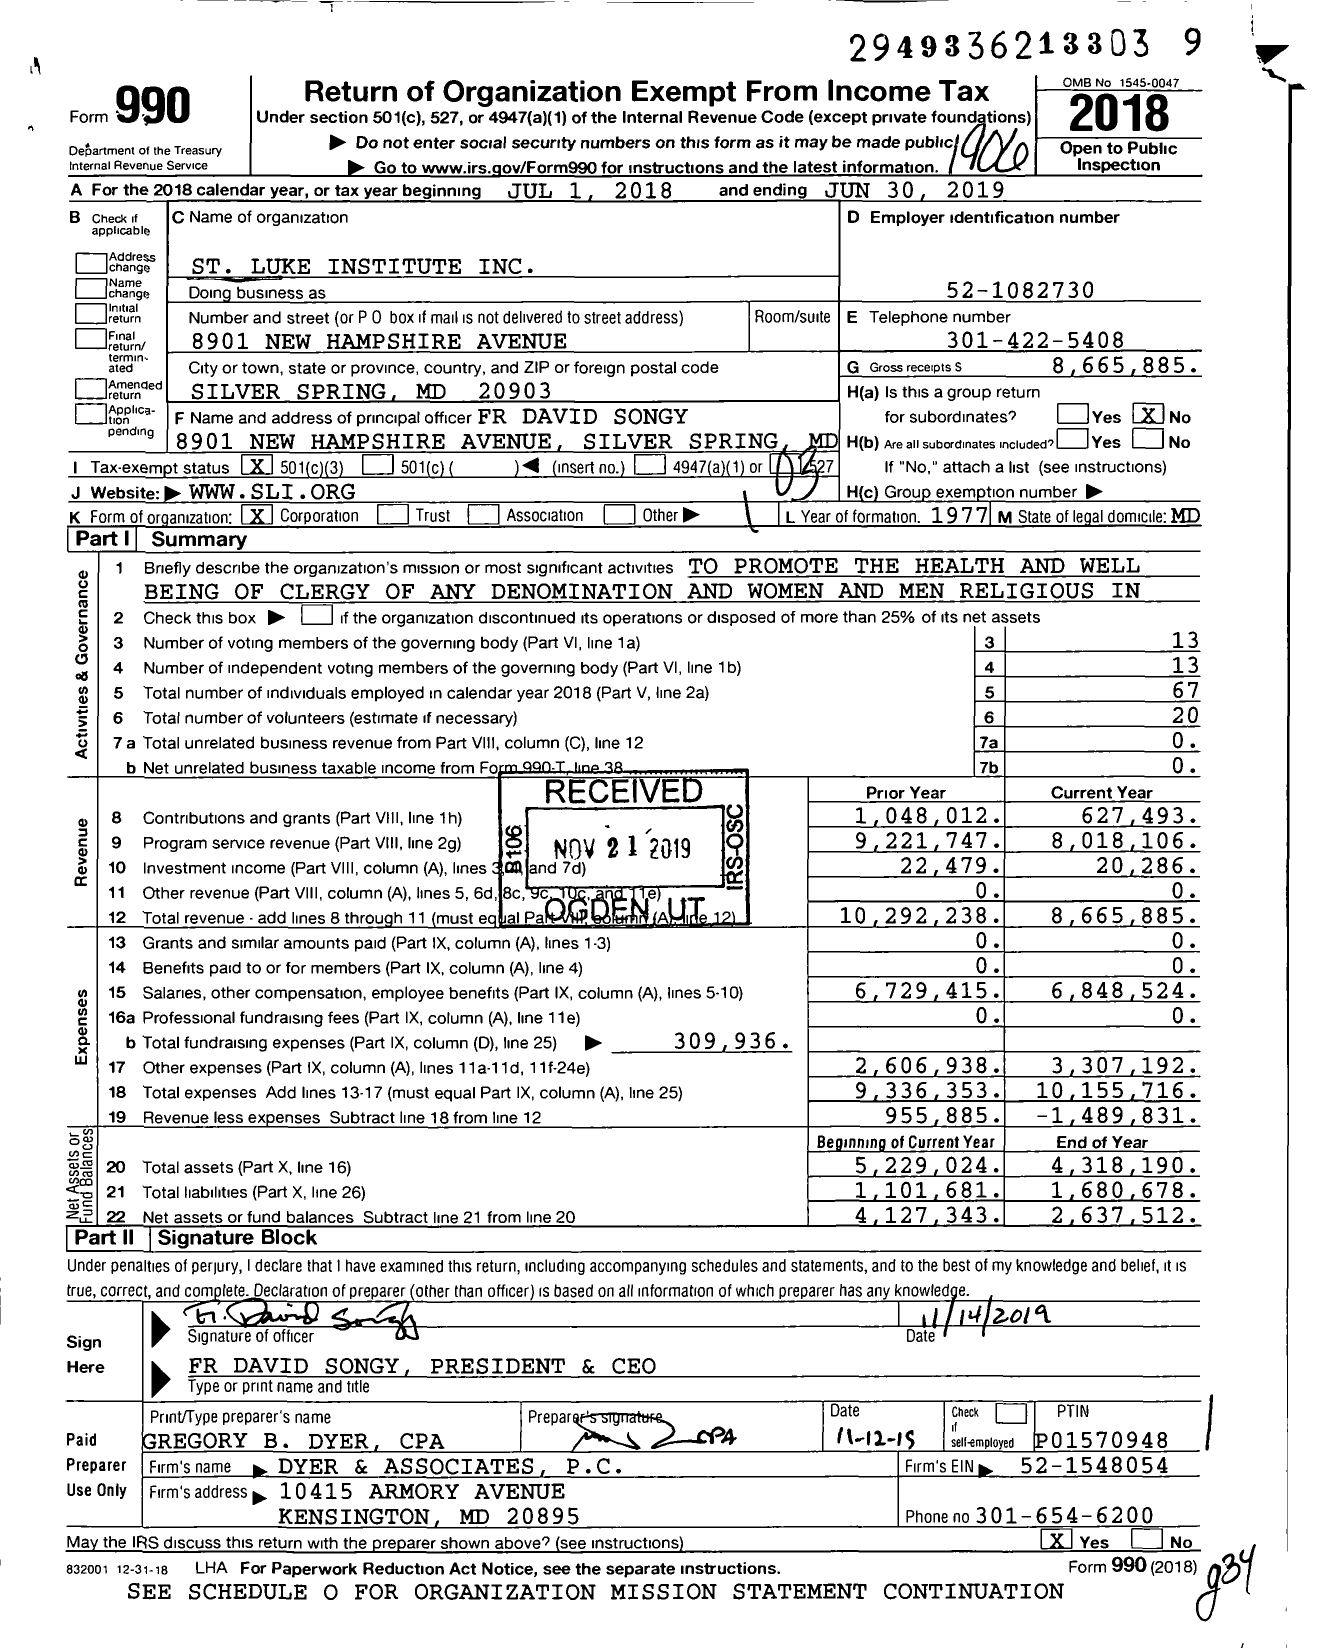 Image of first page of 2018 Form 990 for Saint Luke Institute (SLI)